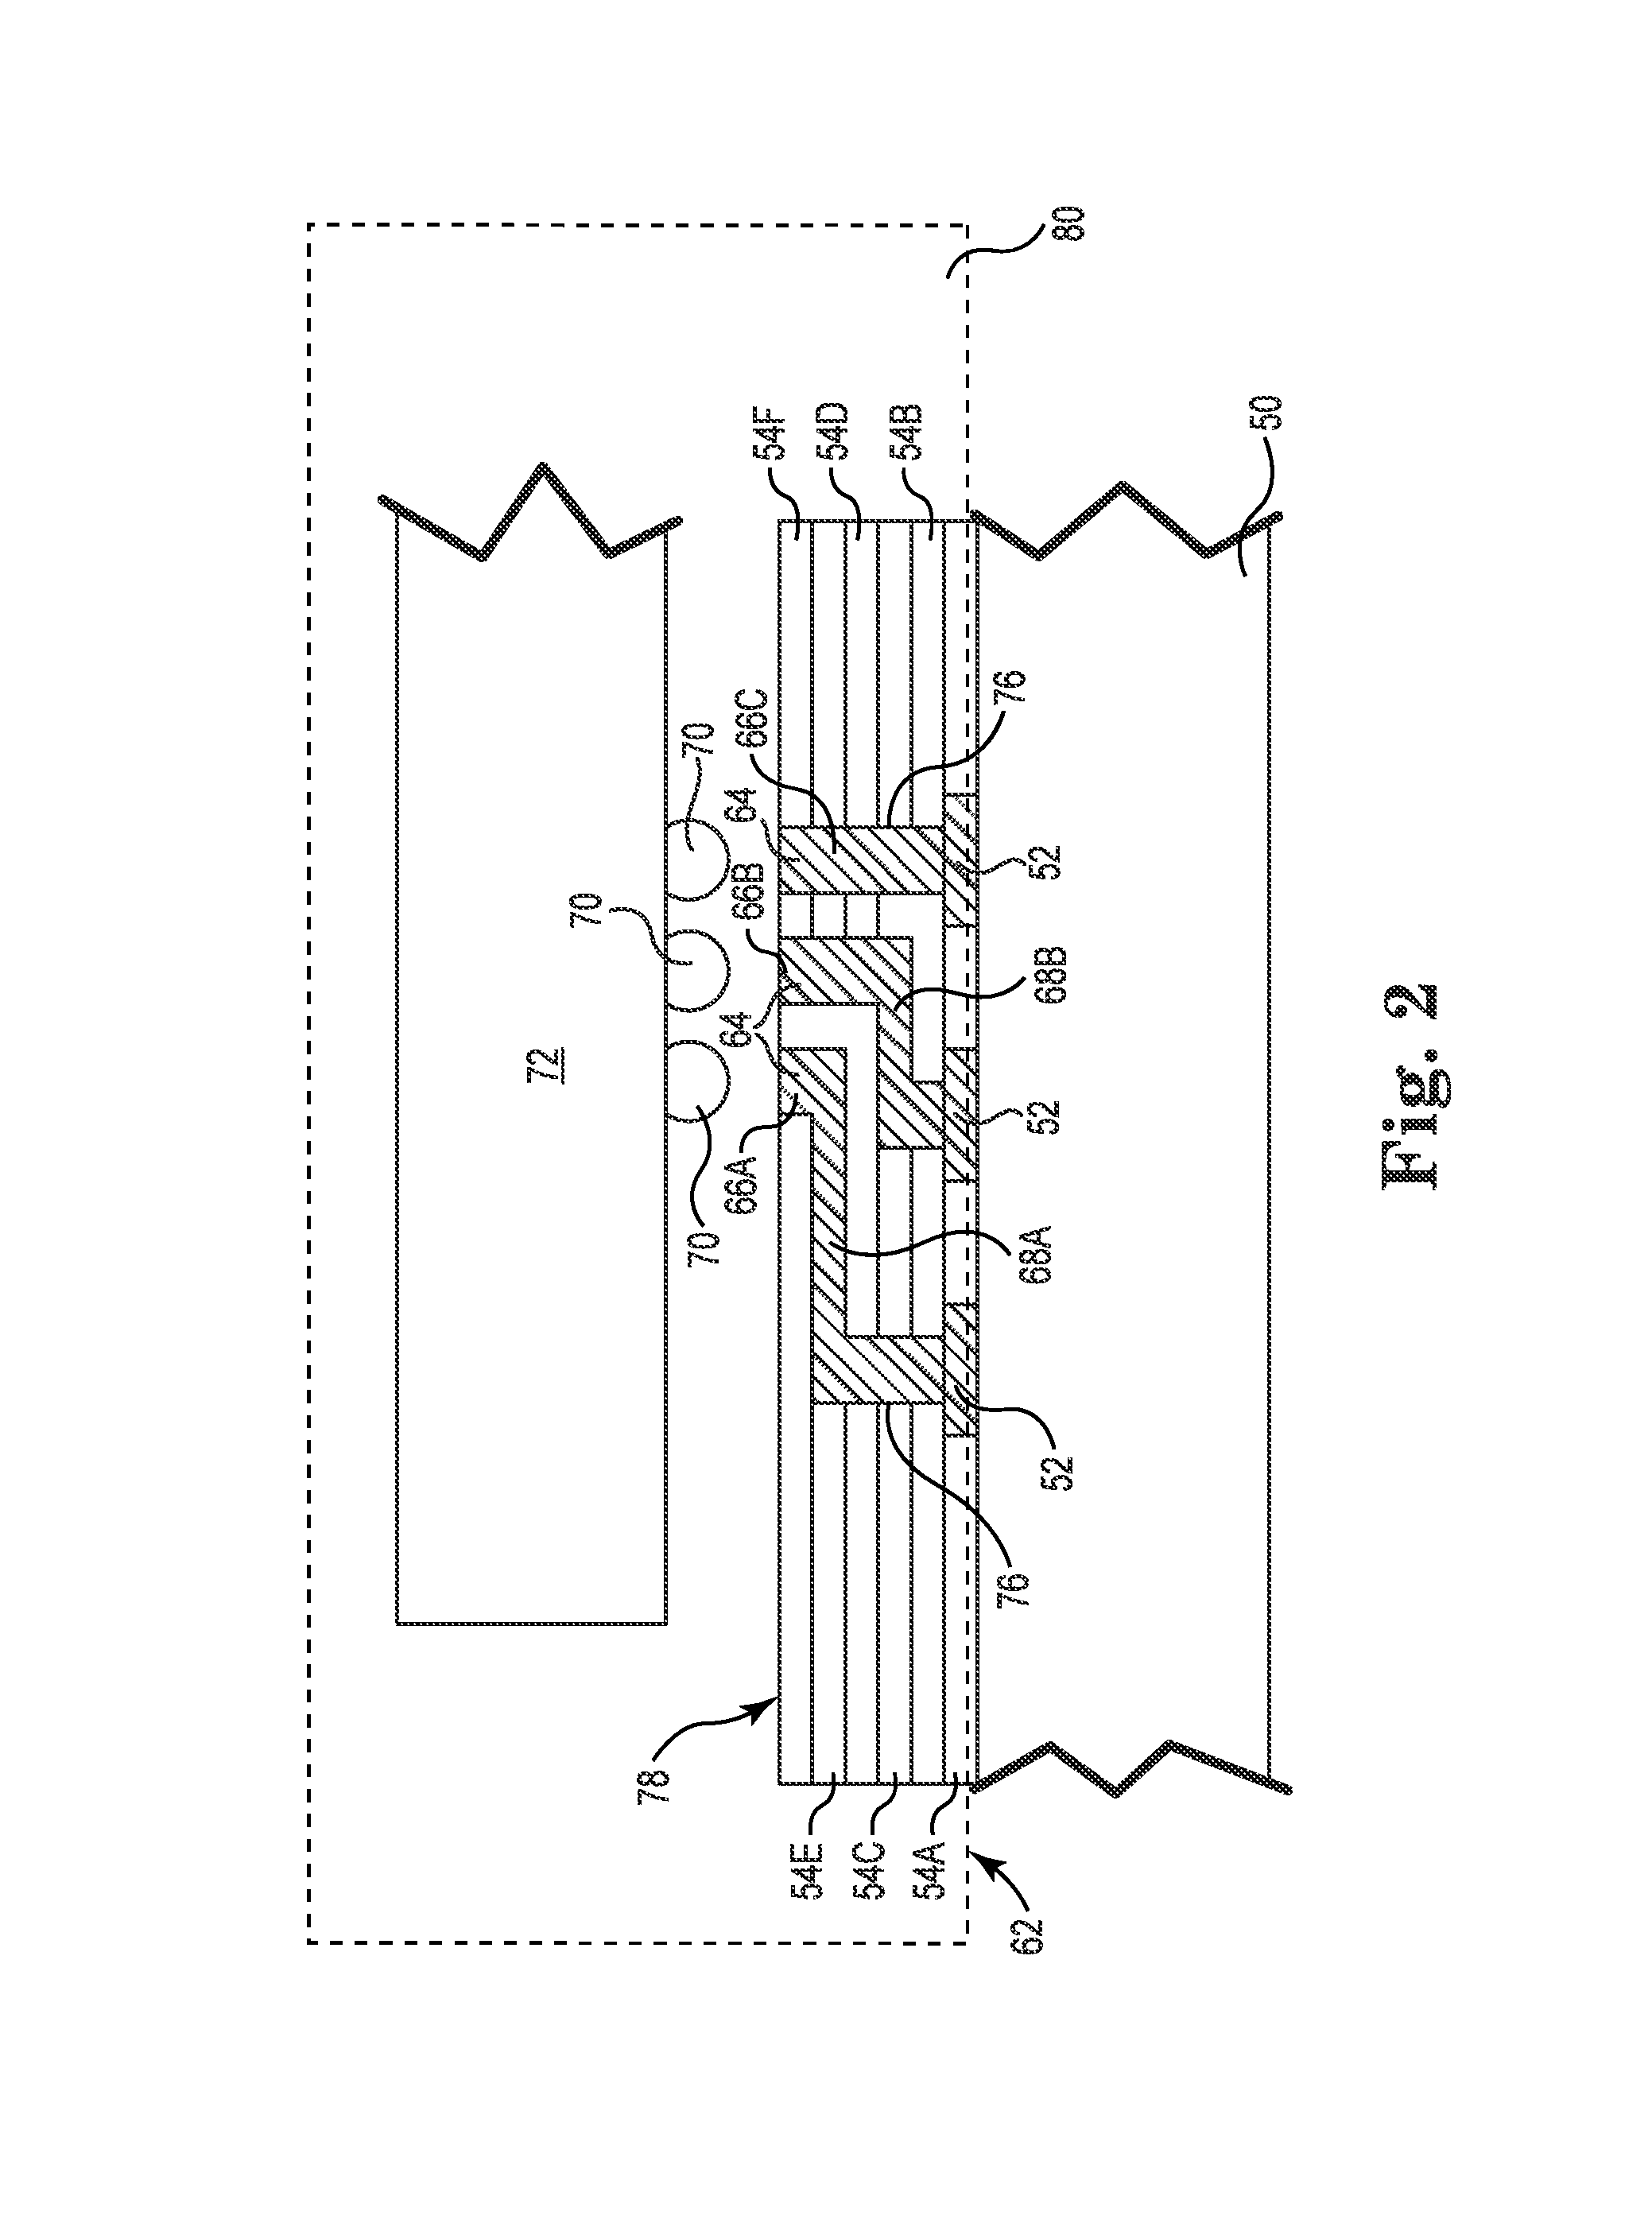 Compliant printed circuit area array semiconductor device package